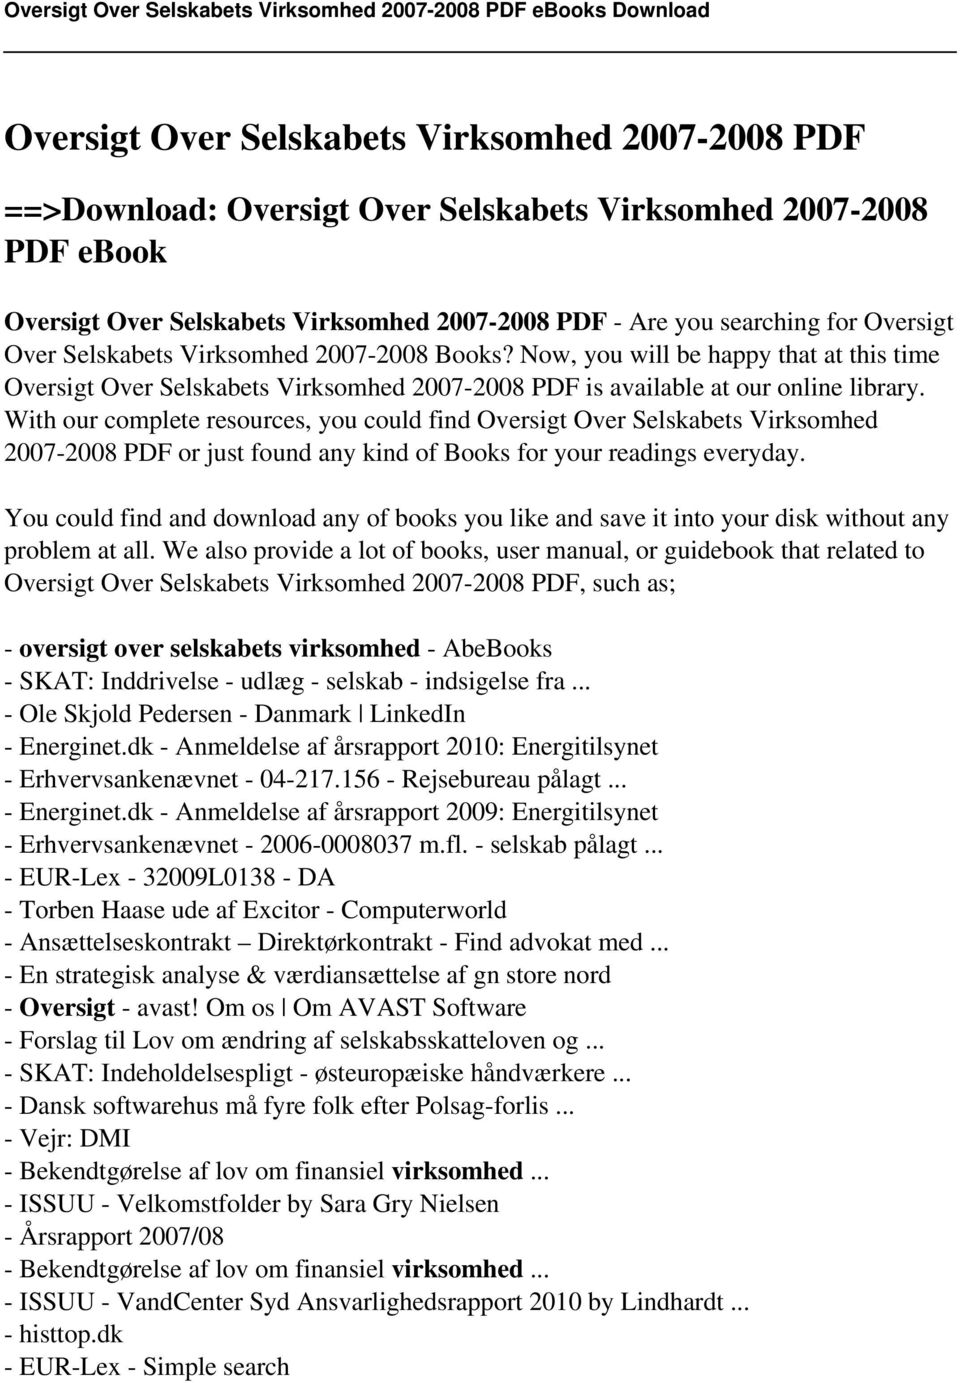 With our complete resources, you could find Oversigt Over Selskabets Virksomhed 2007-2008 PDF or just found any kind of Books for your readings everyday.